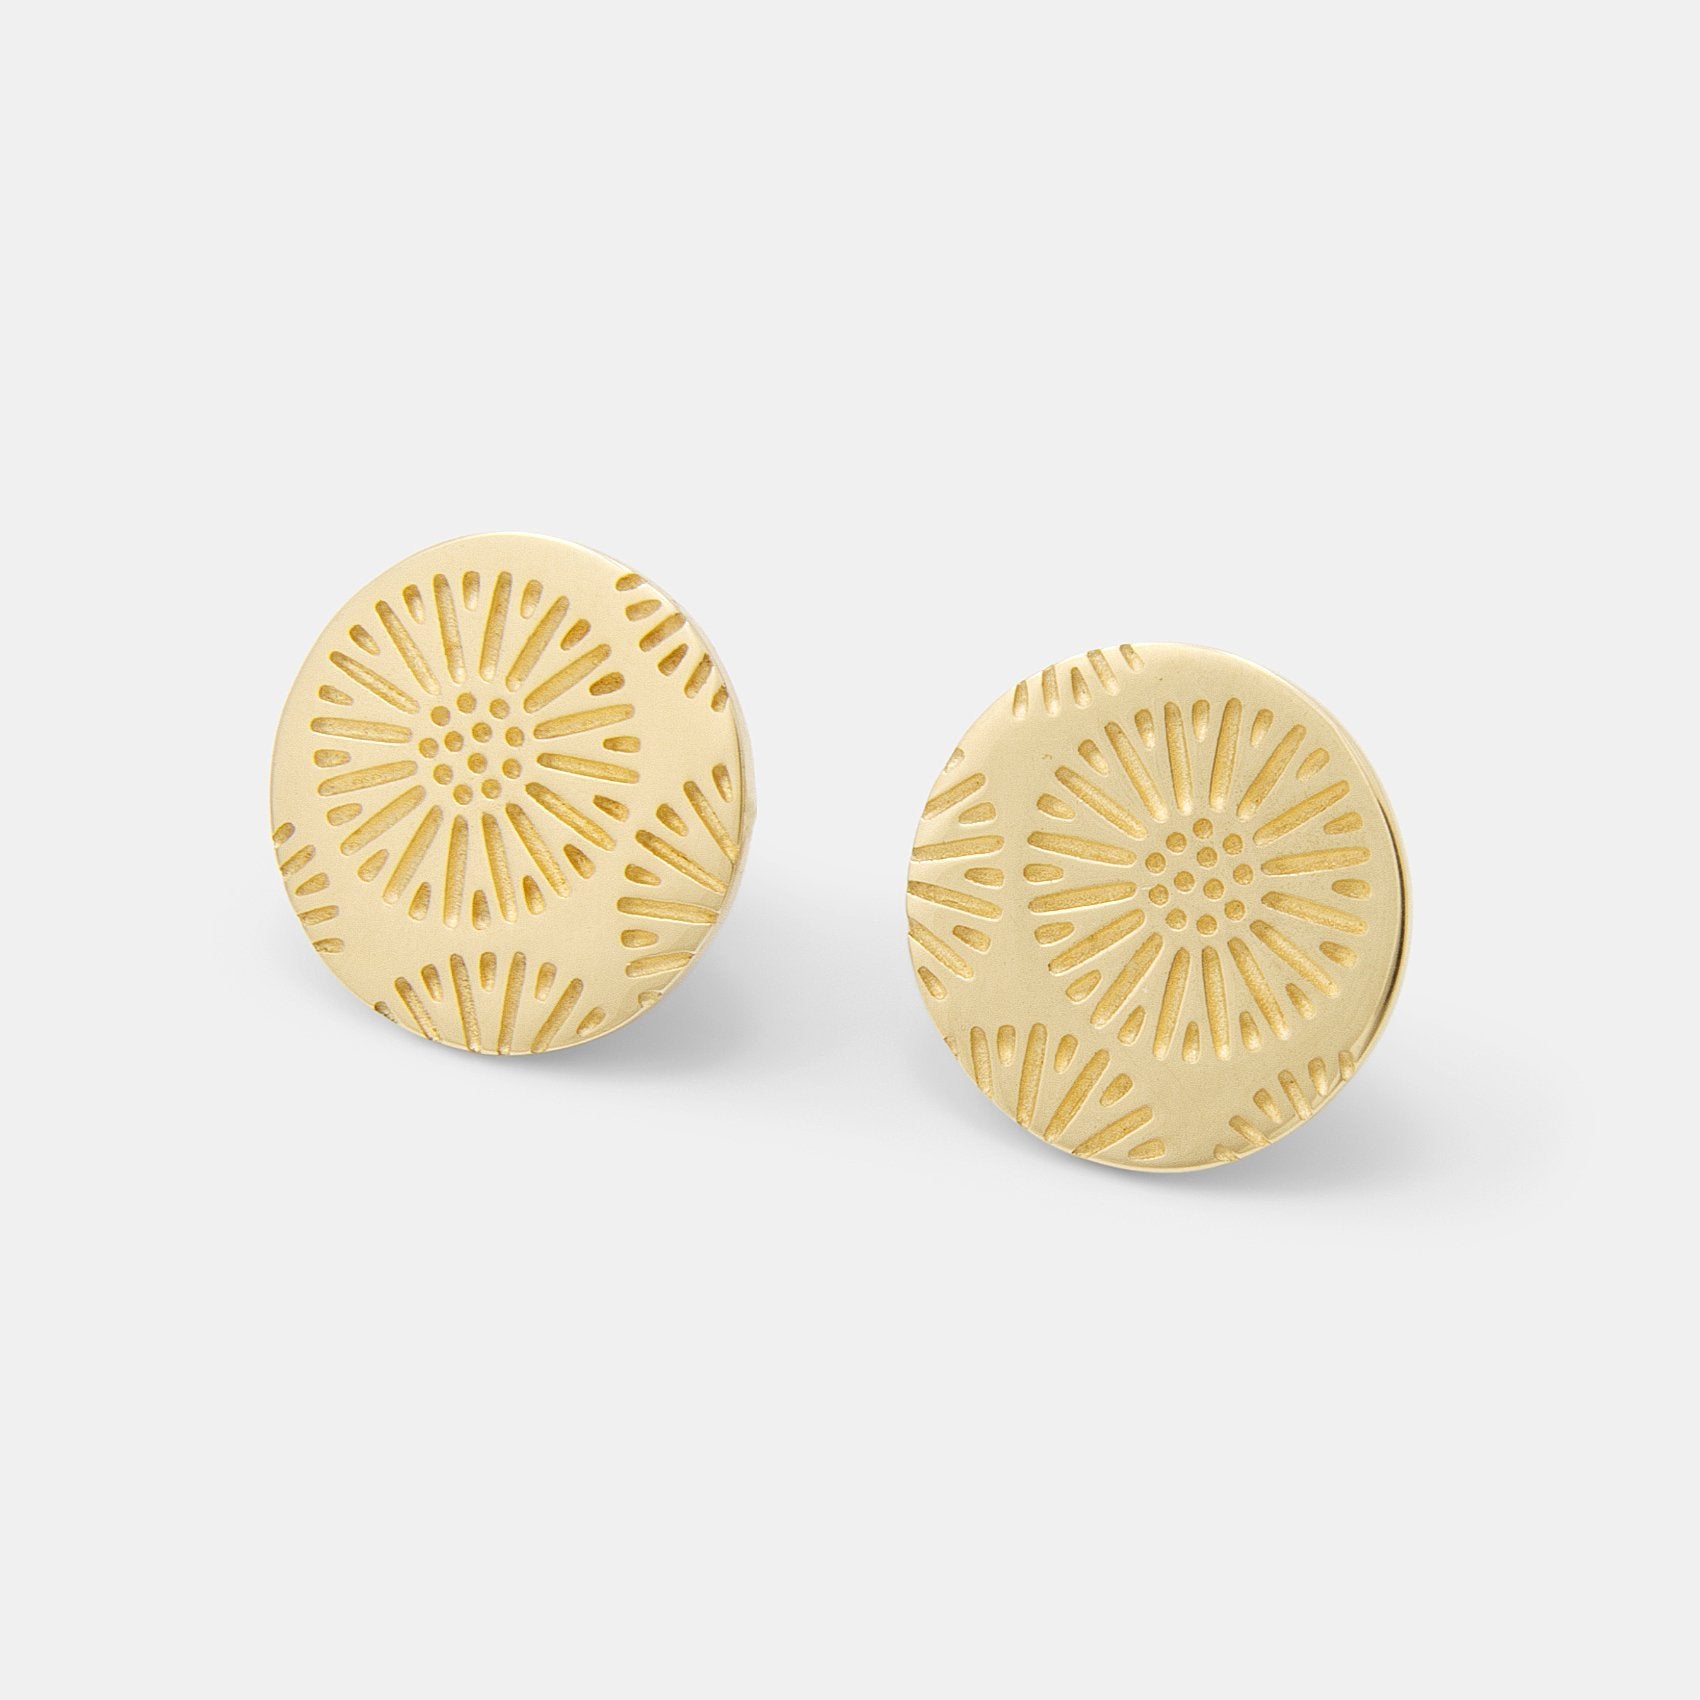 Coral texture solid gold stud earrings - Simone Walsh Jewellery Australia